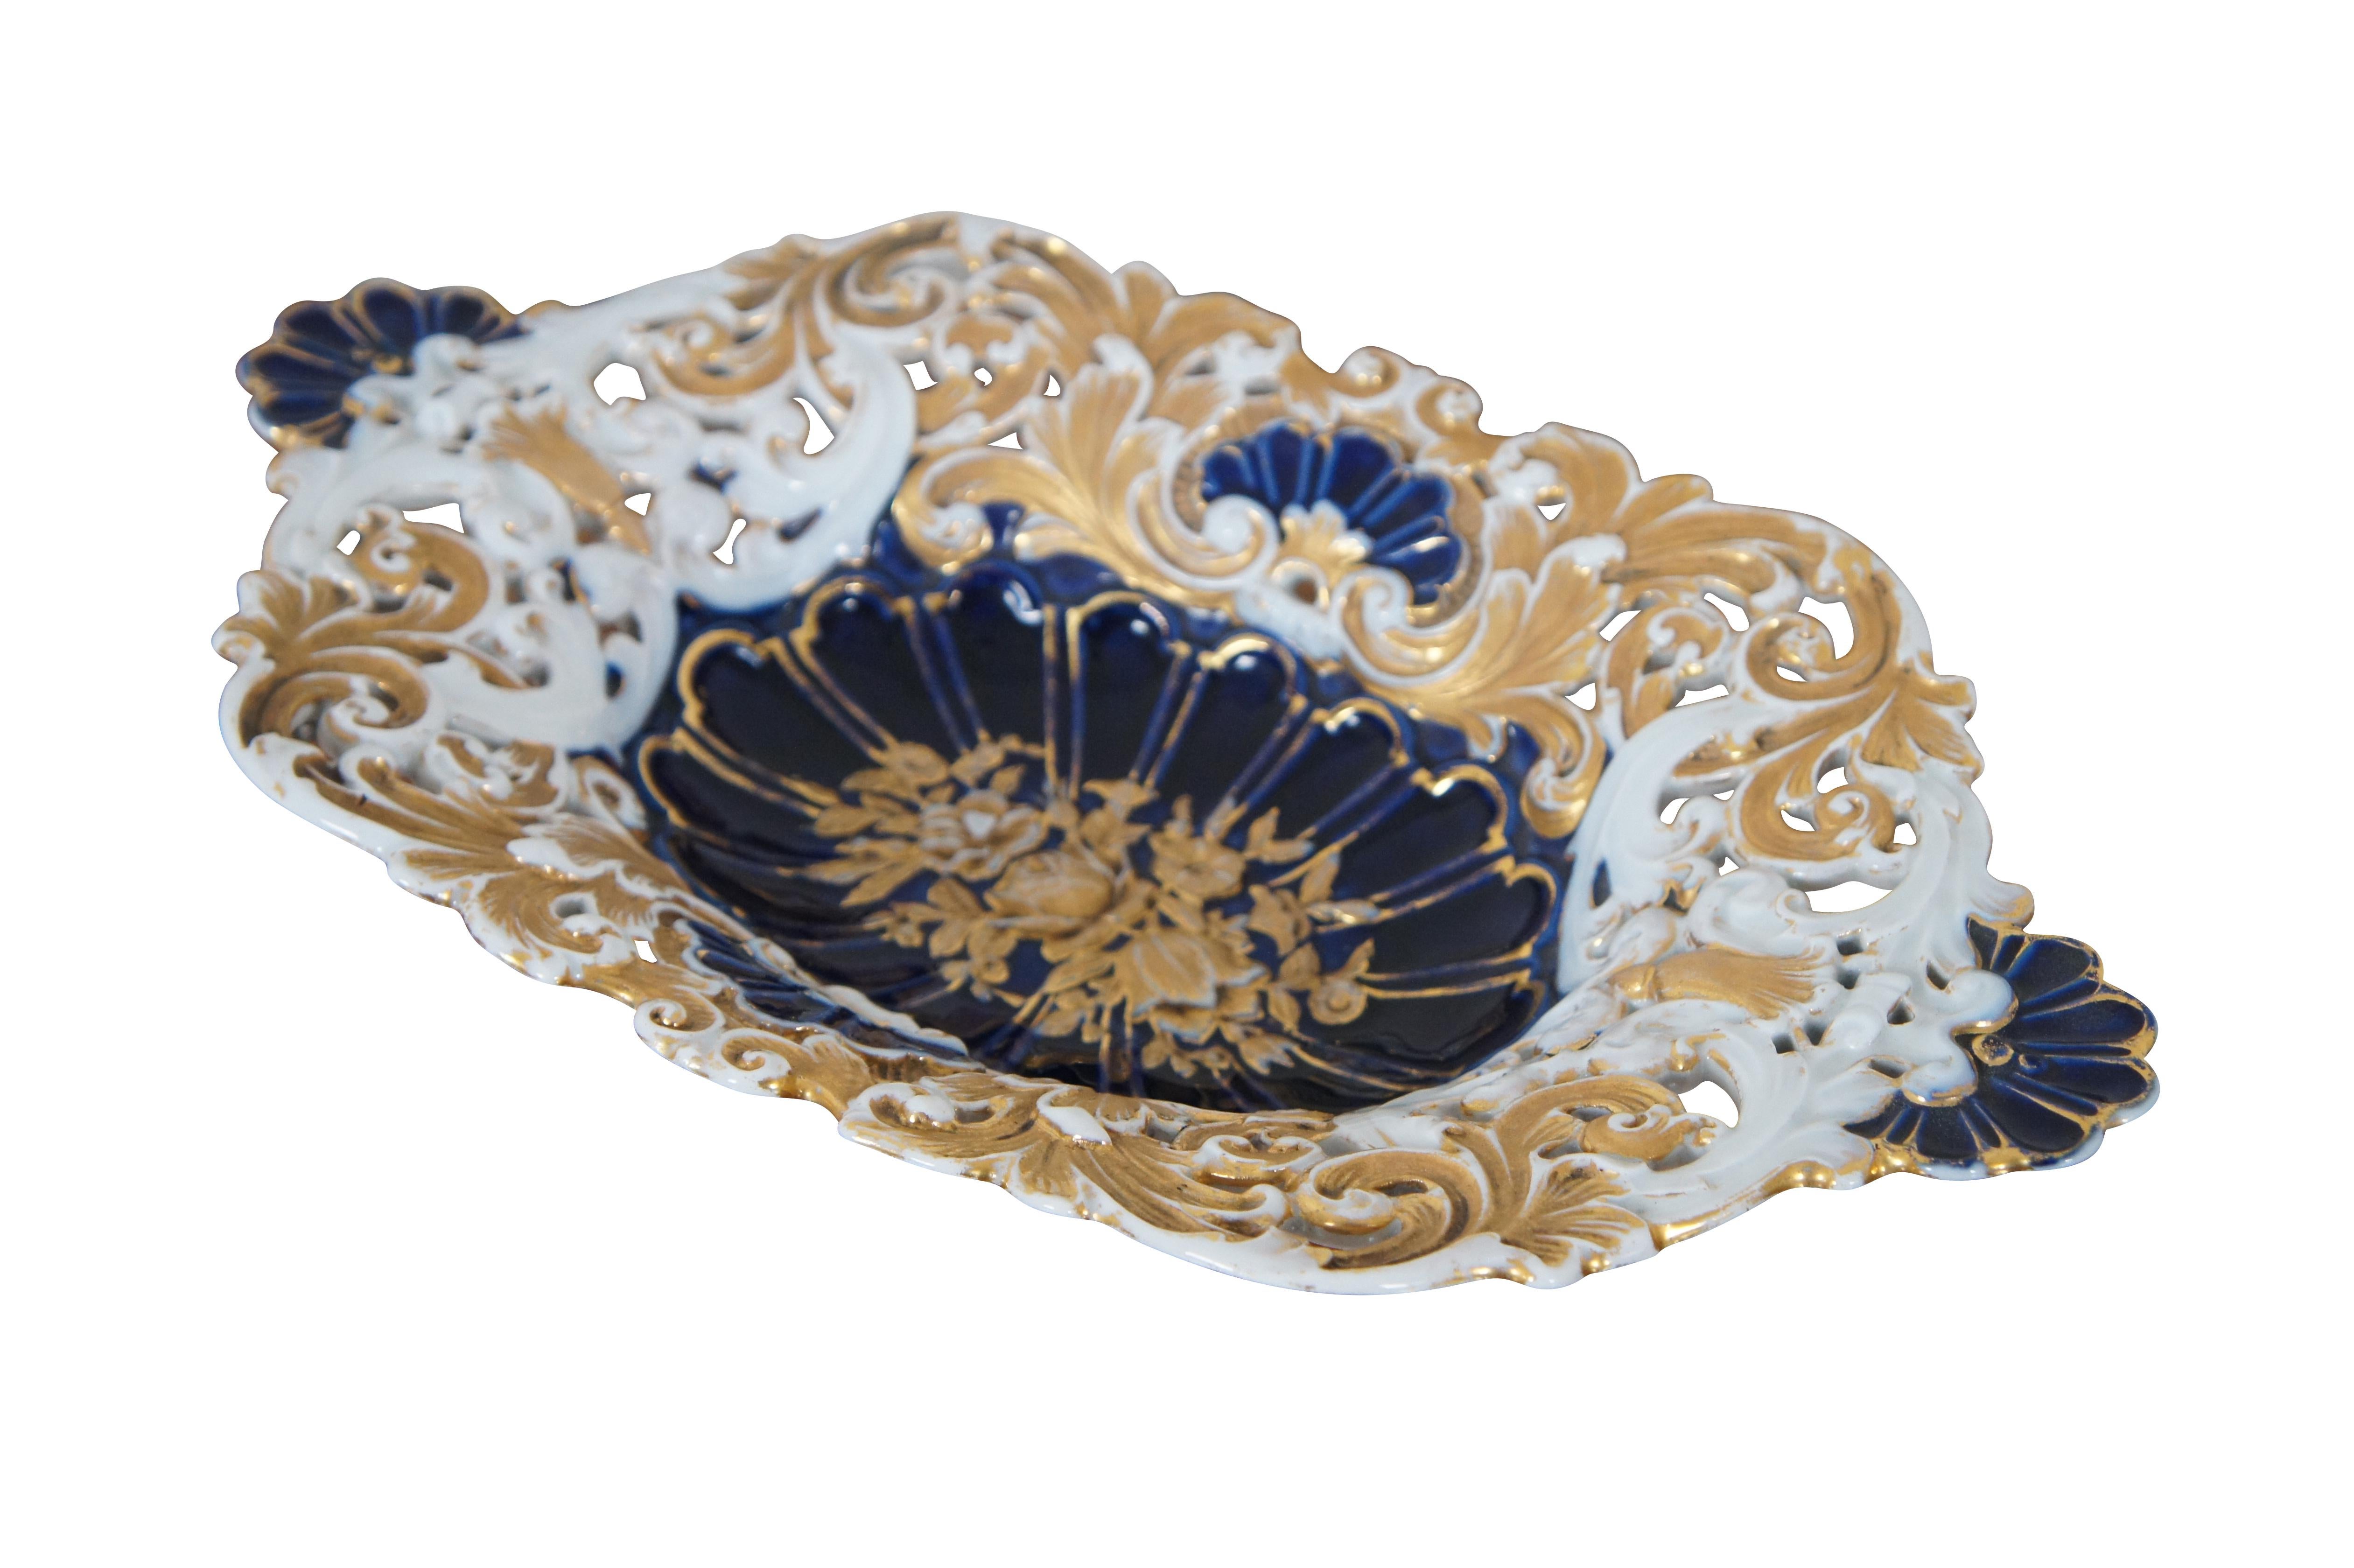 Antique German Meissen porcelain footed cabinet plate / centerpiece bowl / serving platter / compote featuring scalloped oval form with low relief reticulated design of gold gilt roses and acanthus leaves with cobalt blue shell handles and footed